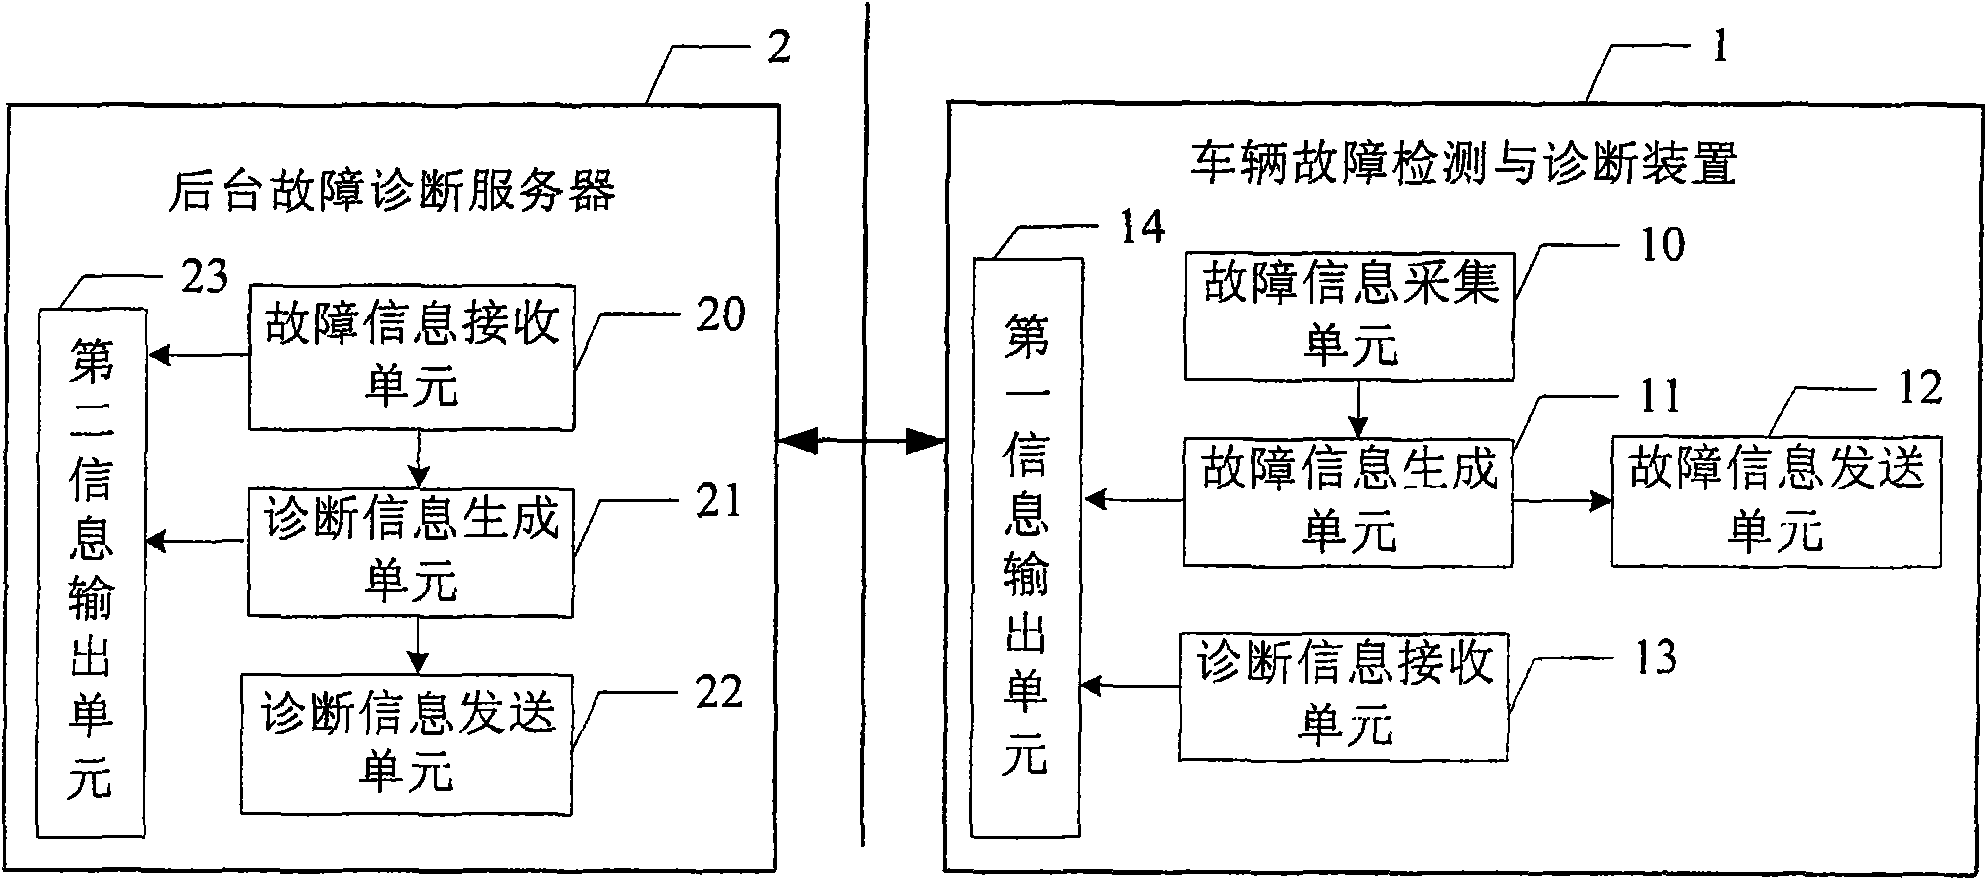 Fault diagnosis server, method, device and system for detecting and diagnosing vehicle fault